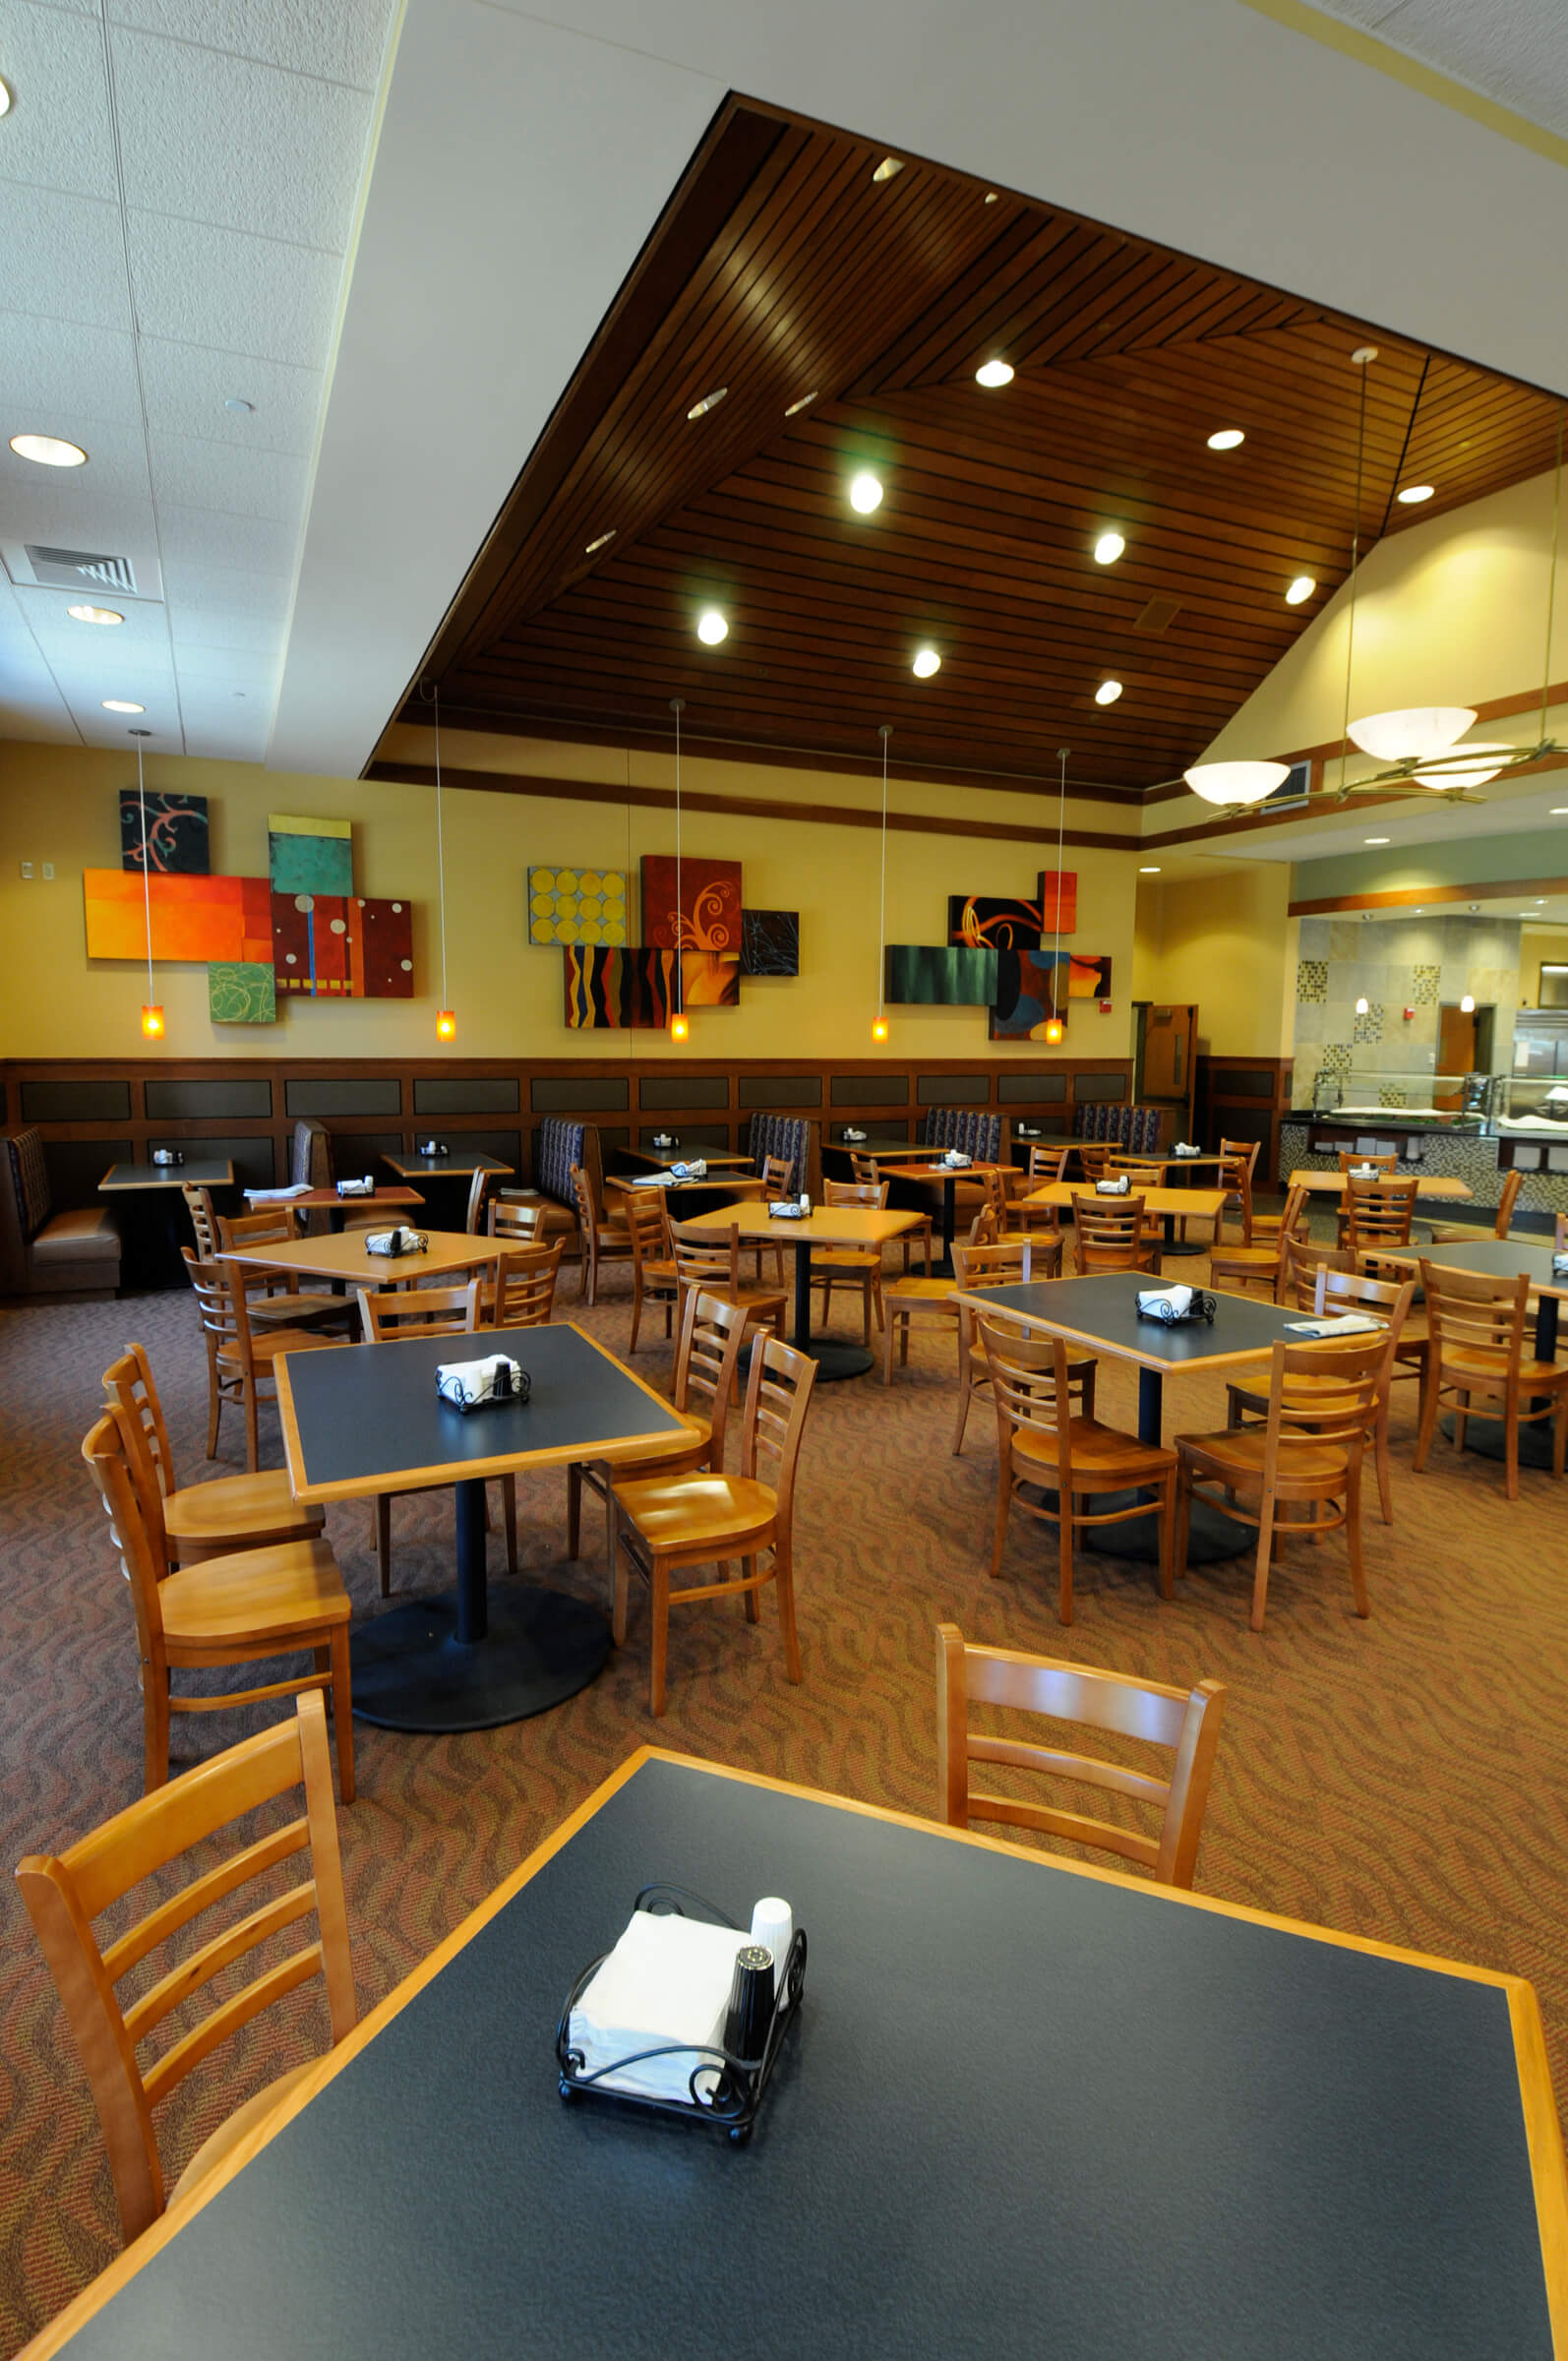 Wiley Dining Court earns national design award